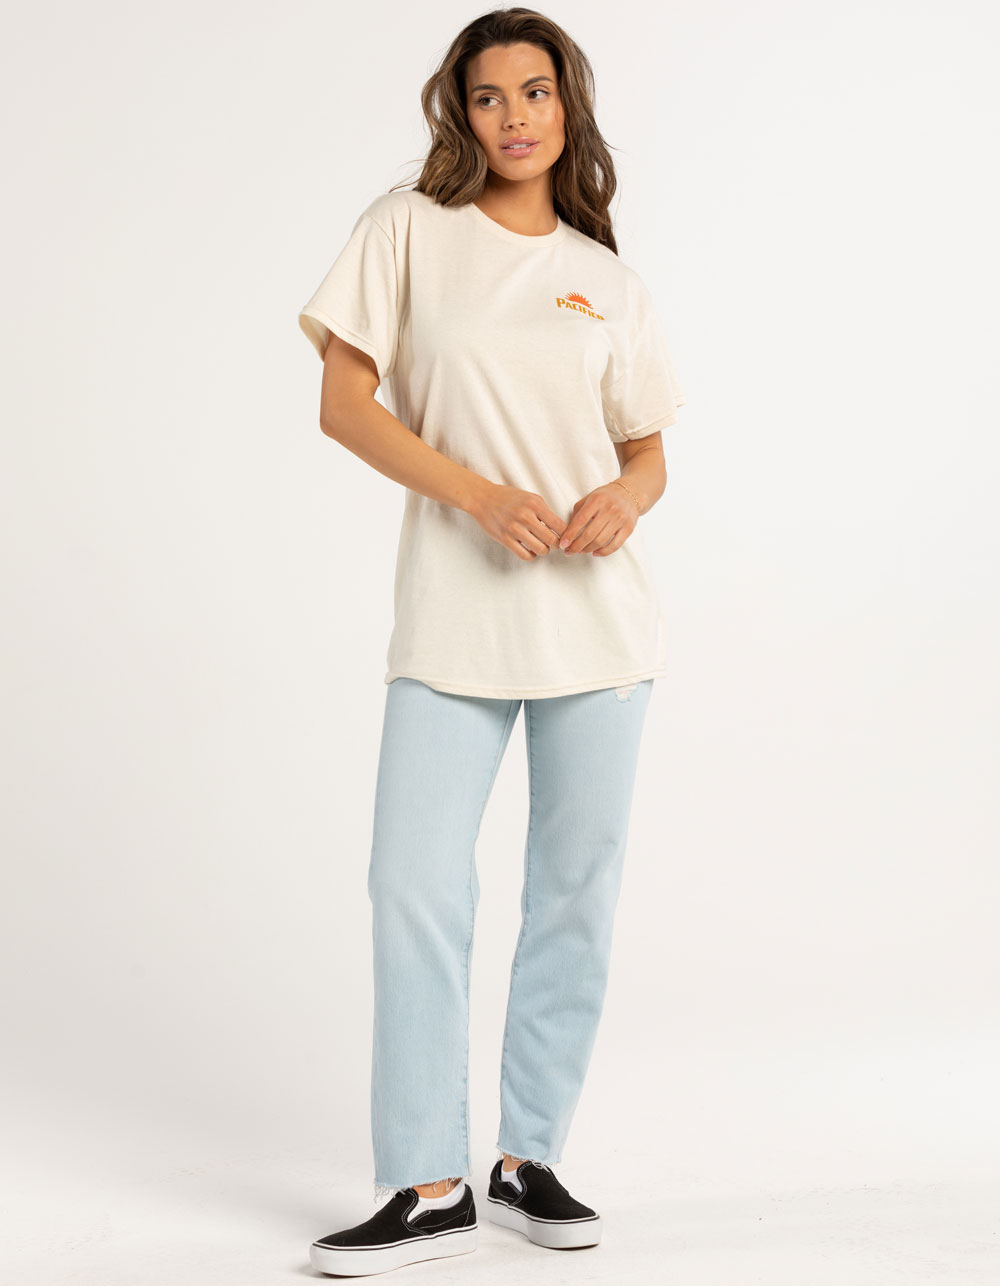 RIPPLE JUNCTION Pacifico Sun Womens Tee - NATURAL | Tillys